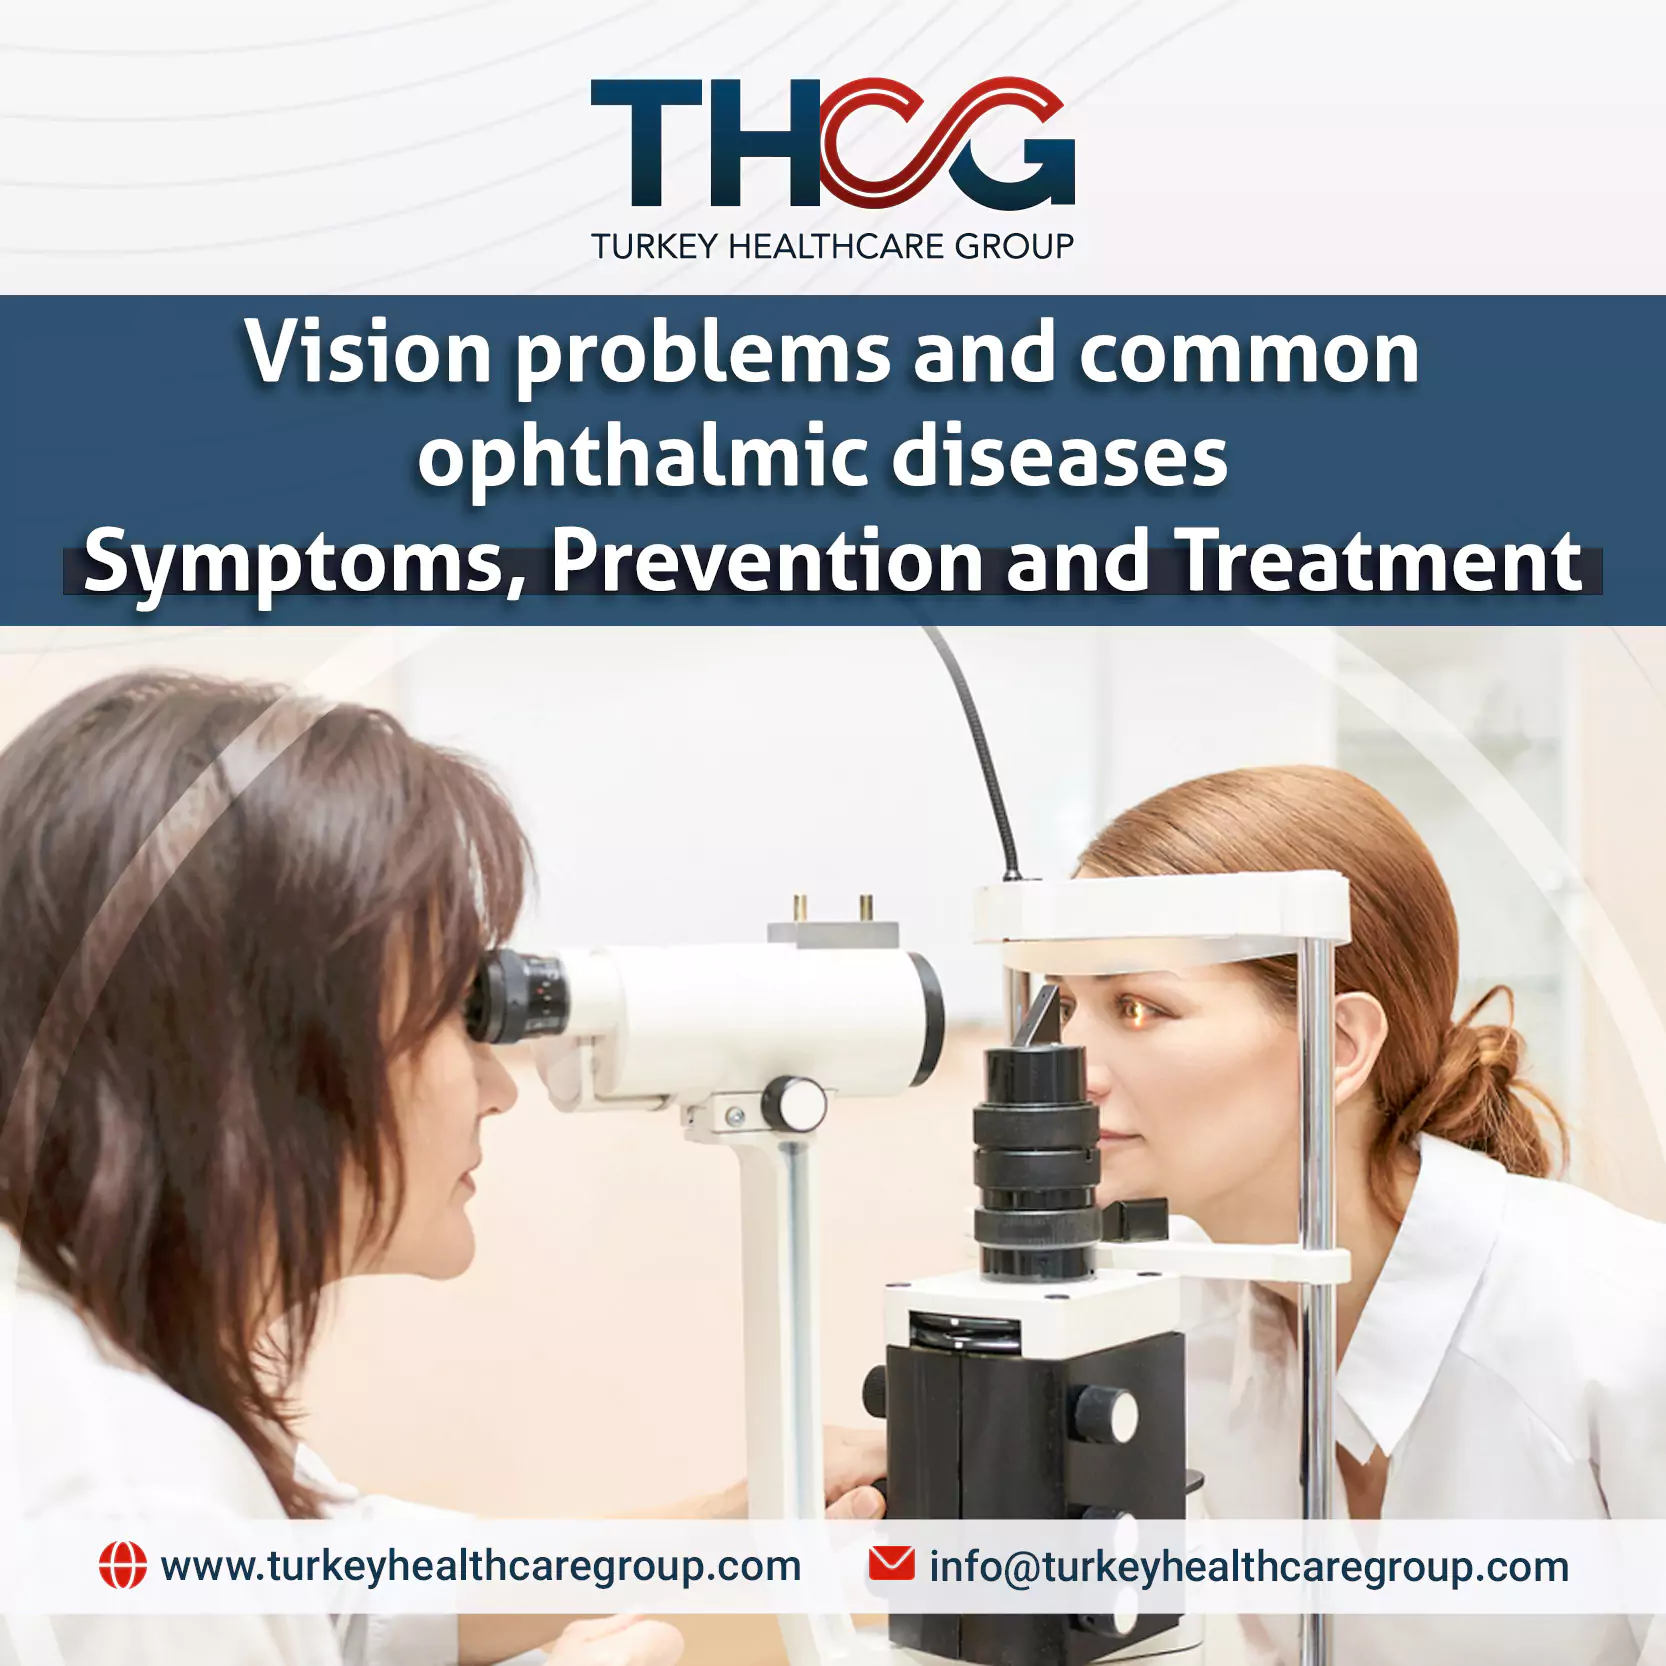 Vision problems and common ophthalmic diseases